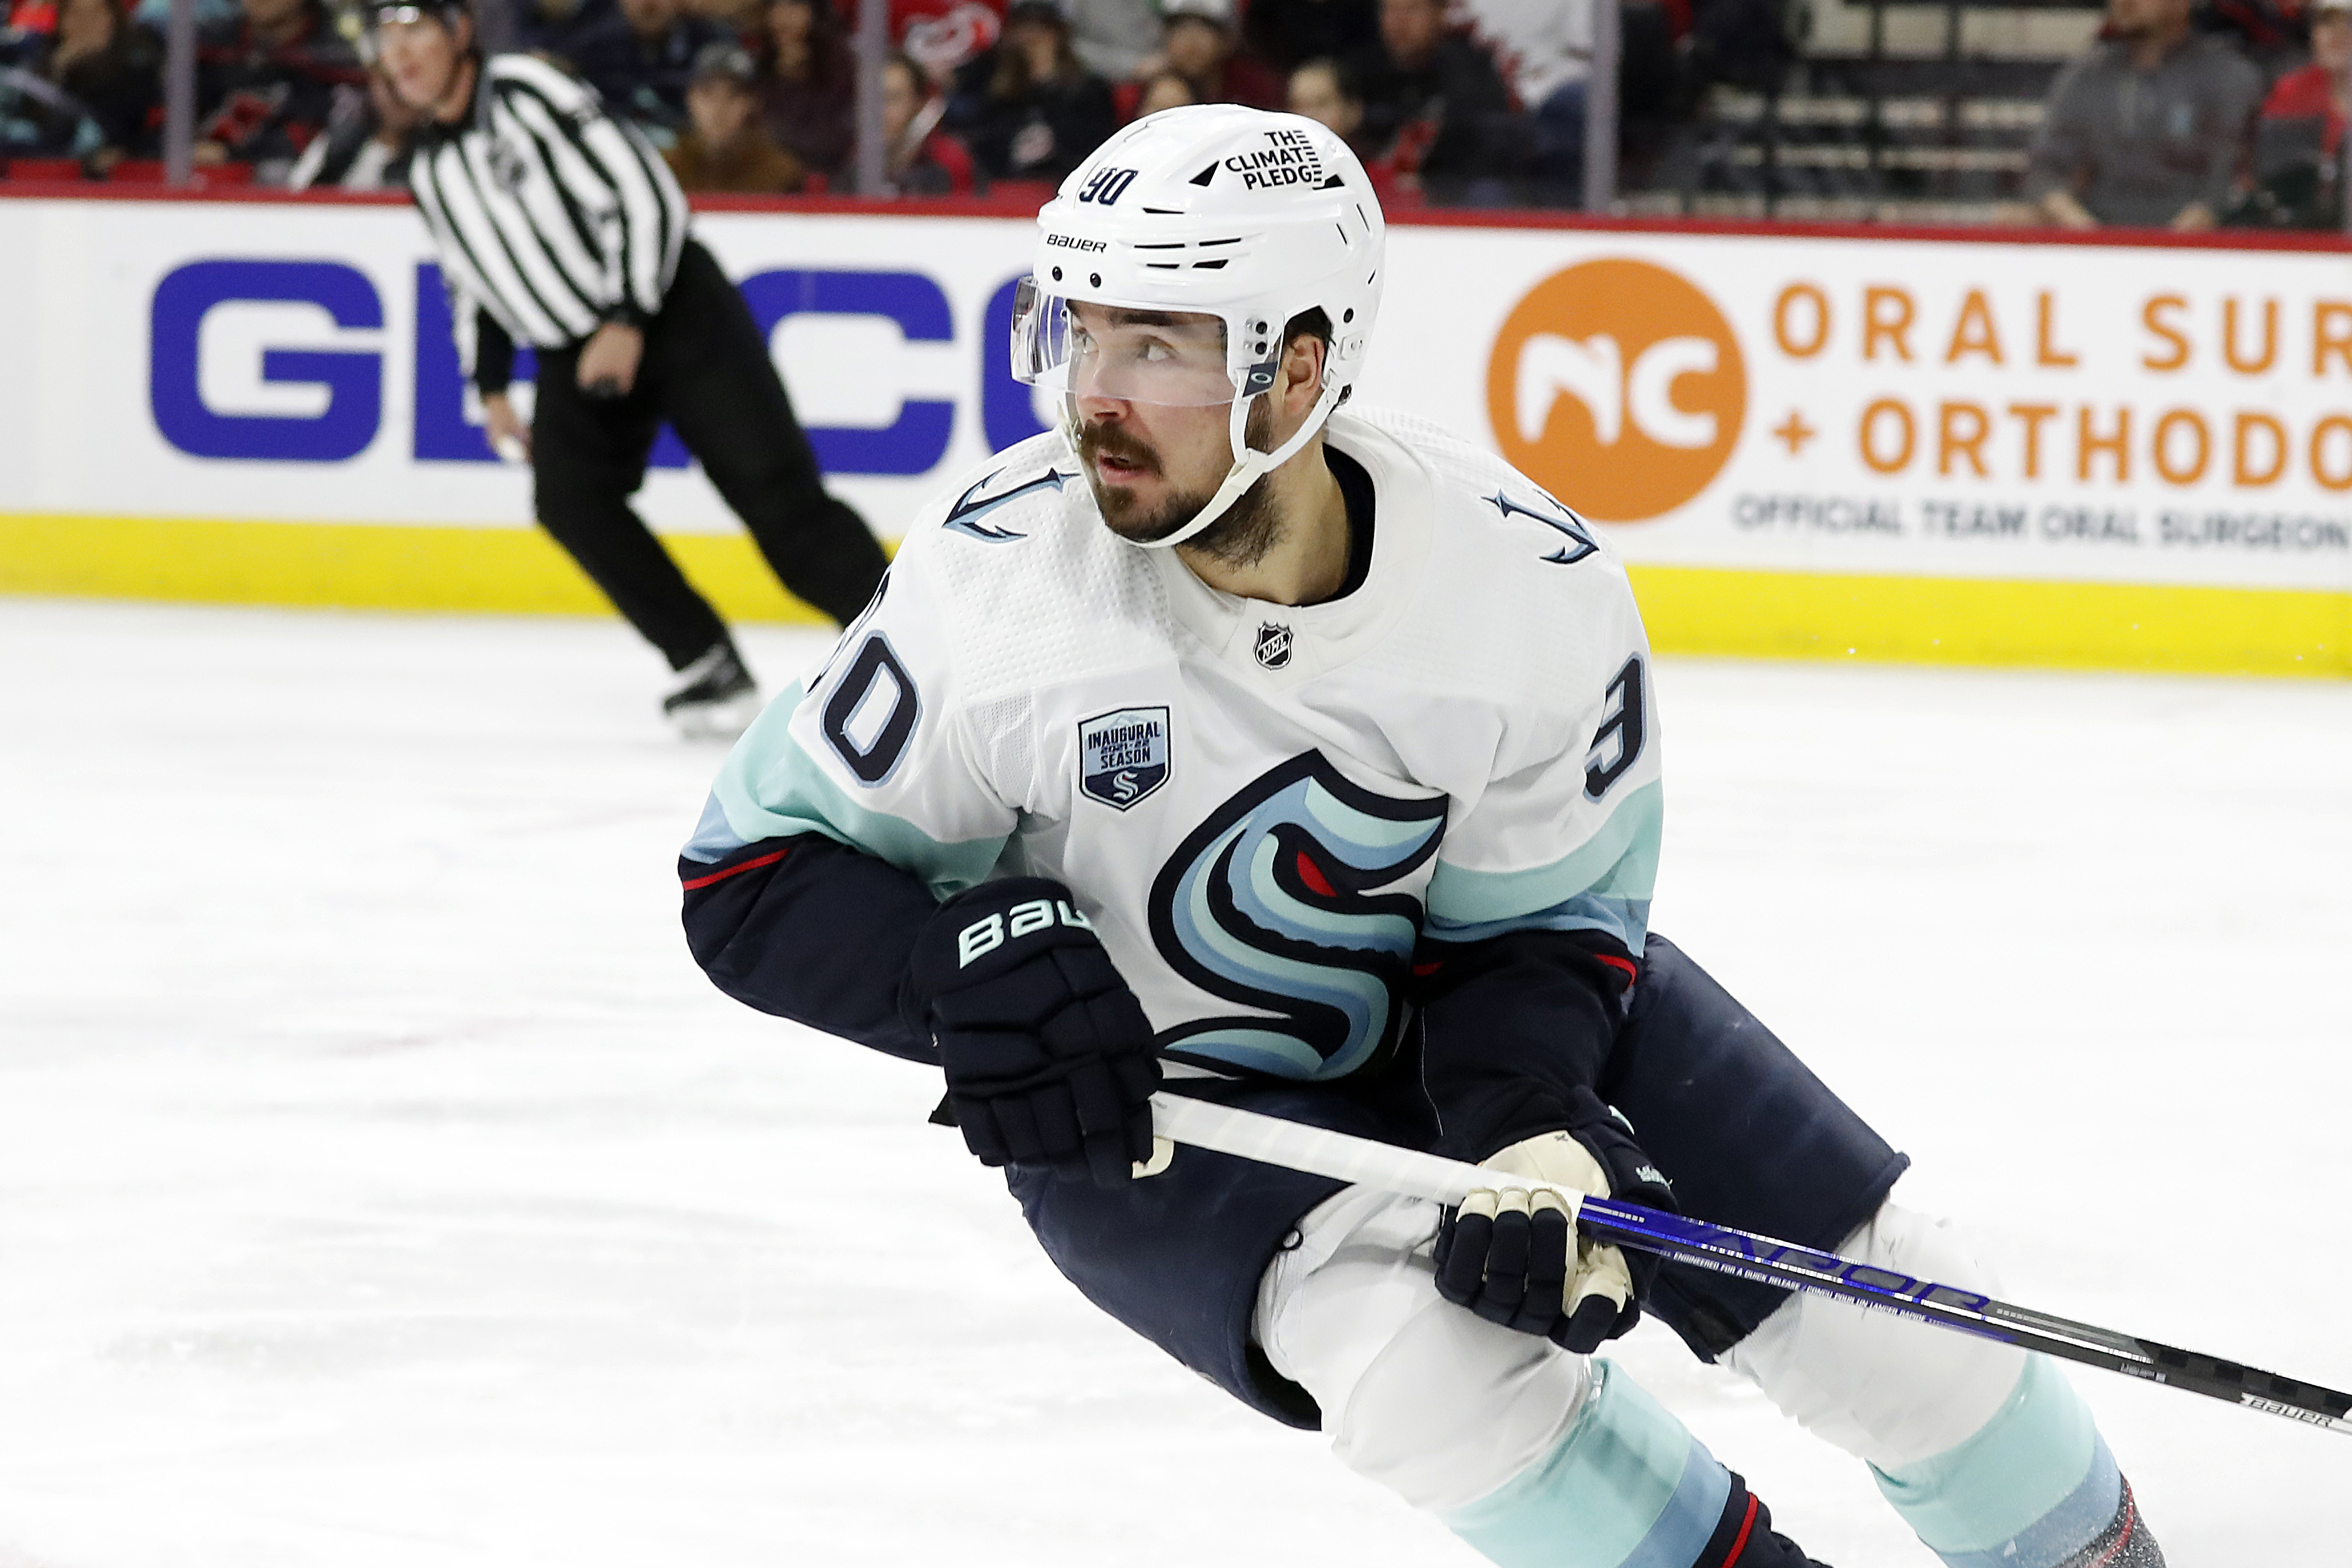 Marcus Johansson's late winner gives Kraken 2-1 victory over 'Canes